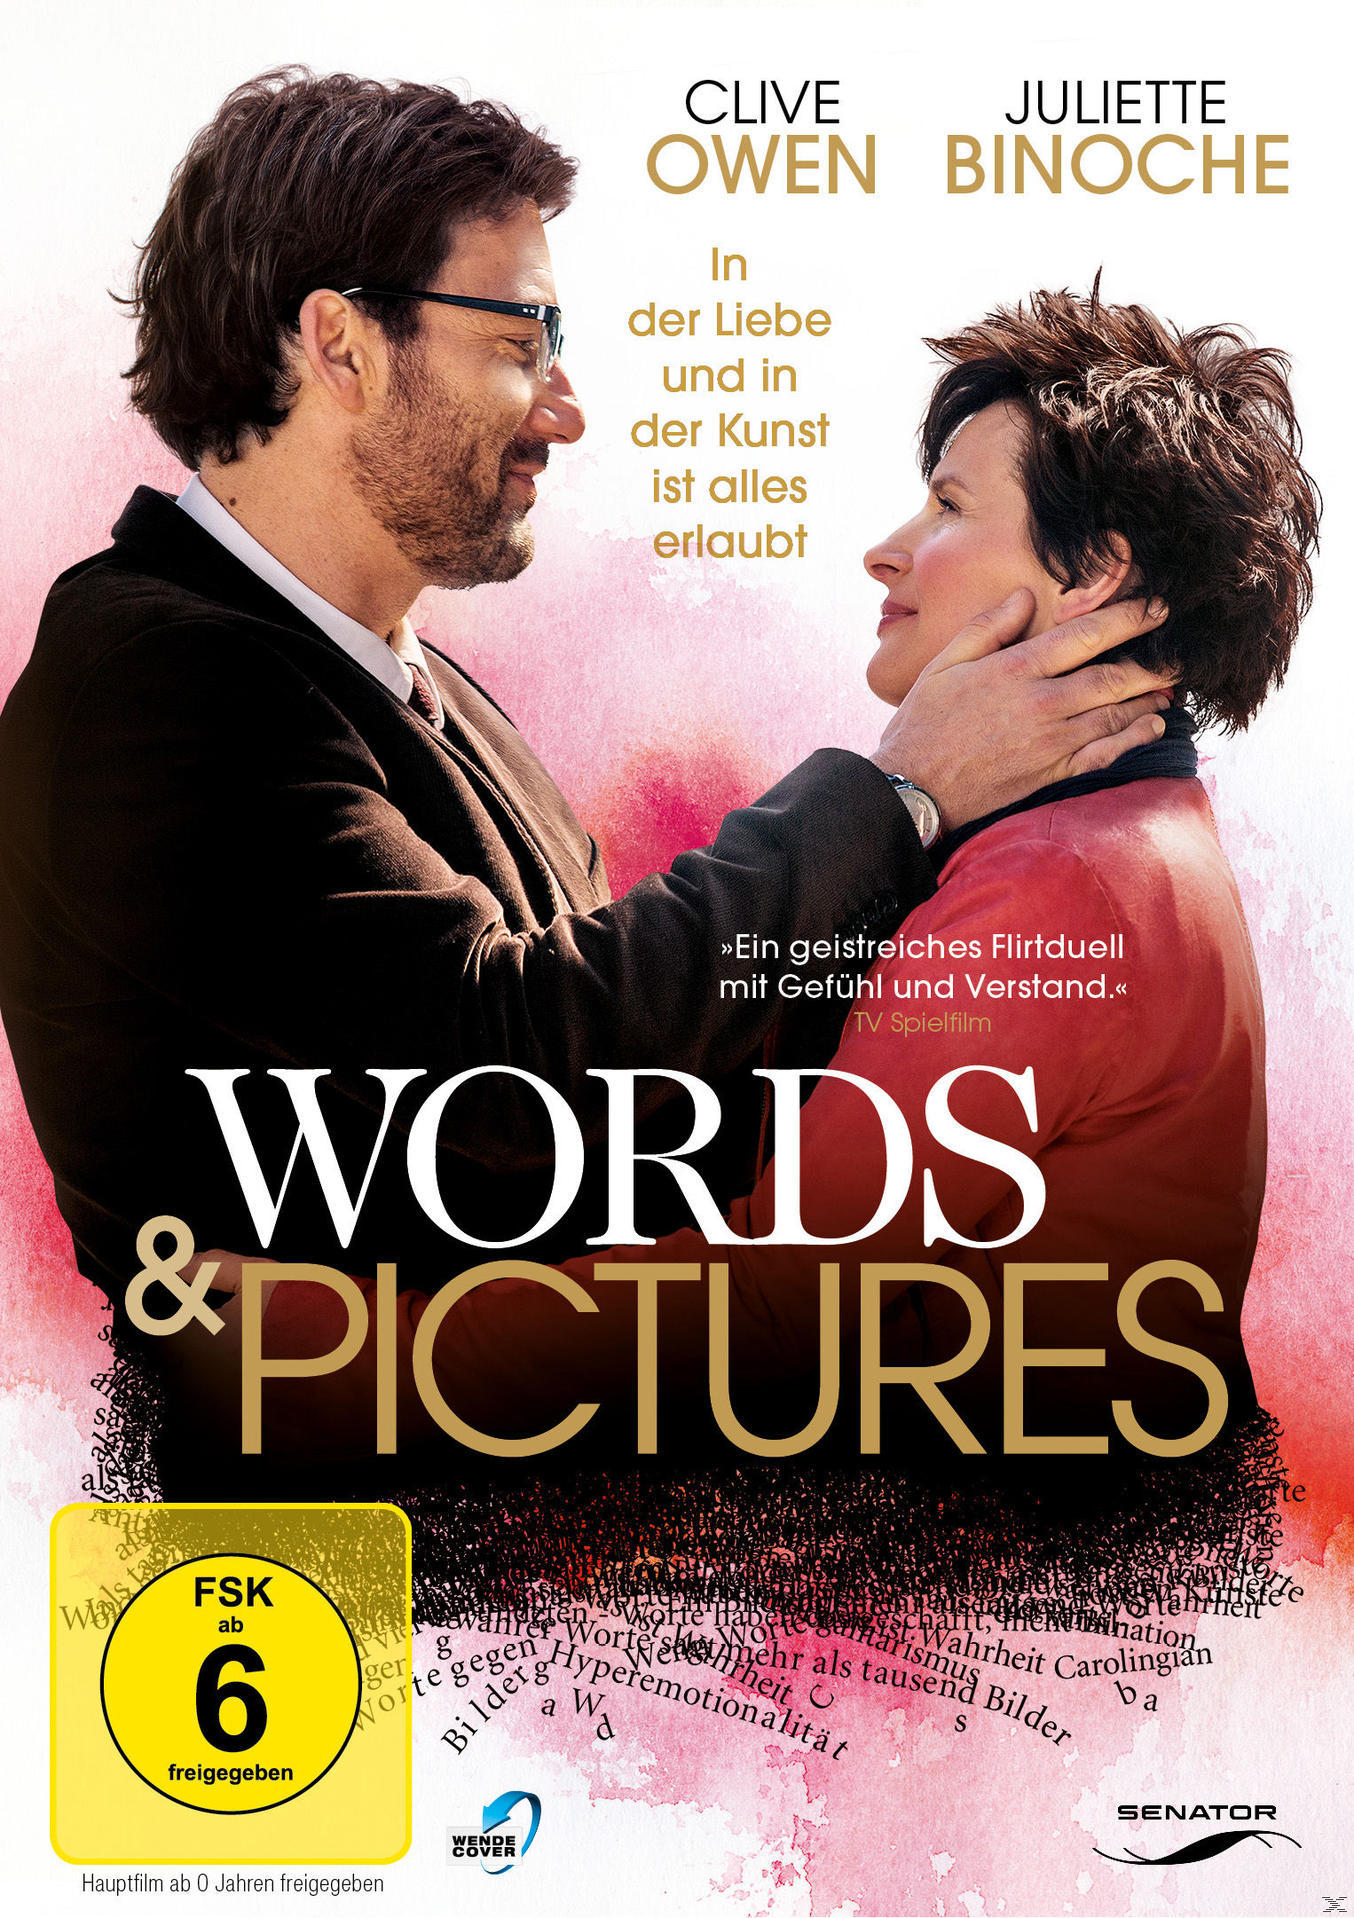 PICTURES AND DVD WORDS